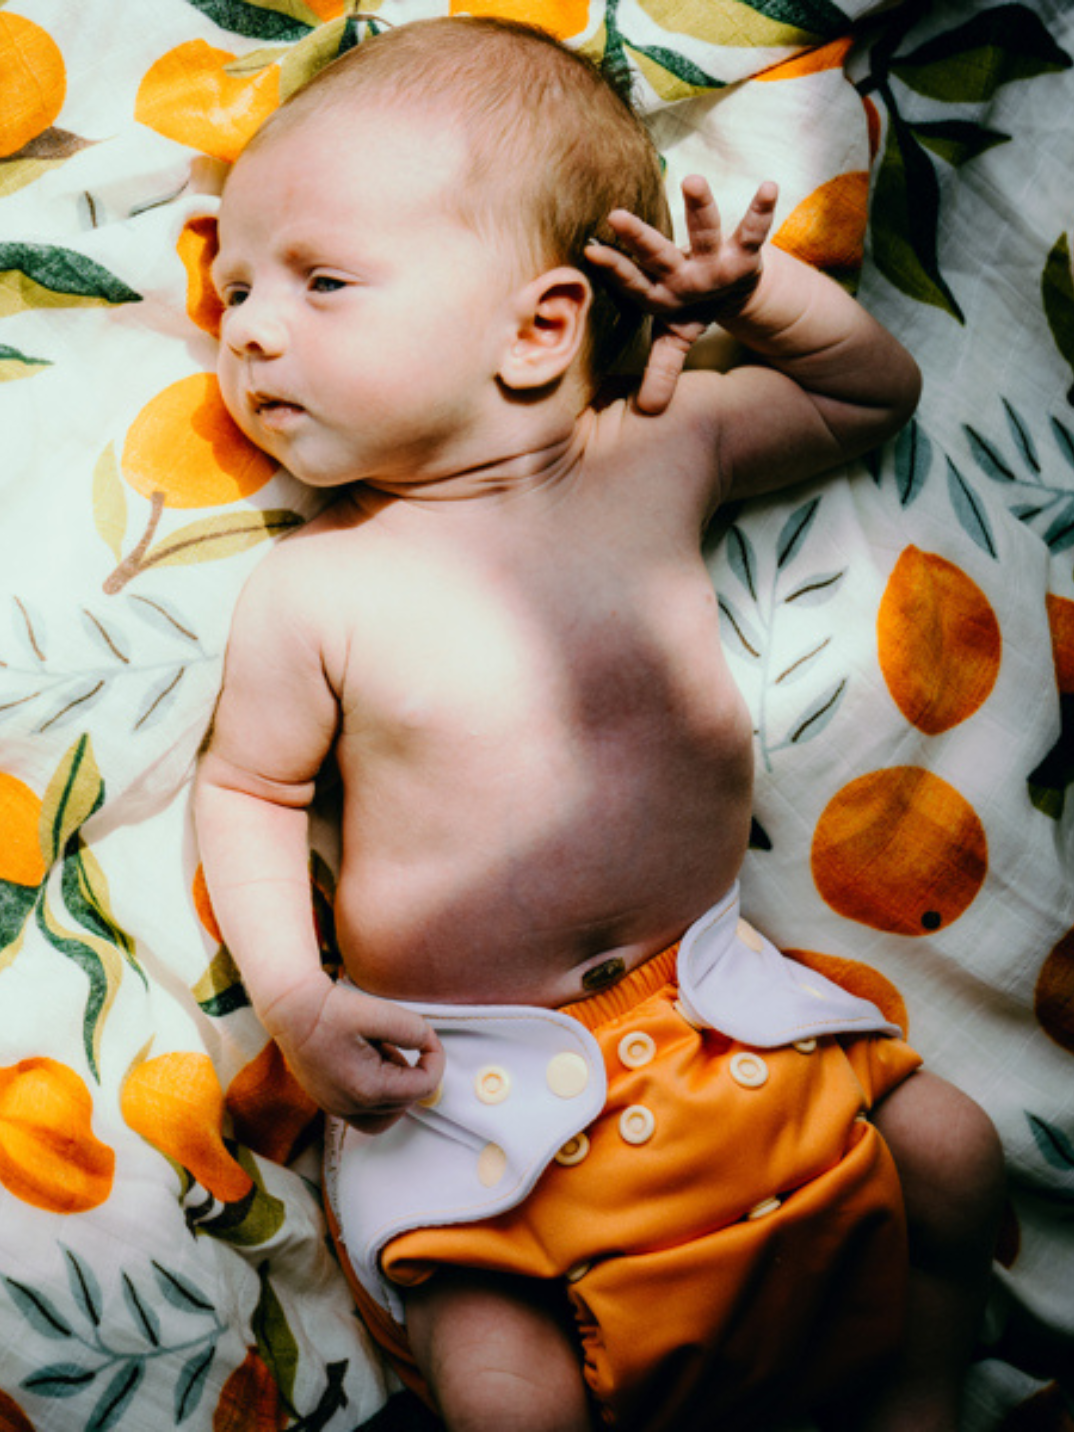 Just Peachy Cloth Diapers are designed to make fun, leak-proof and convenient diapering a reality for modern parents who want to choose better for their babies and do better for the planet.